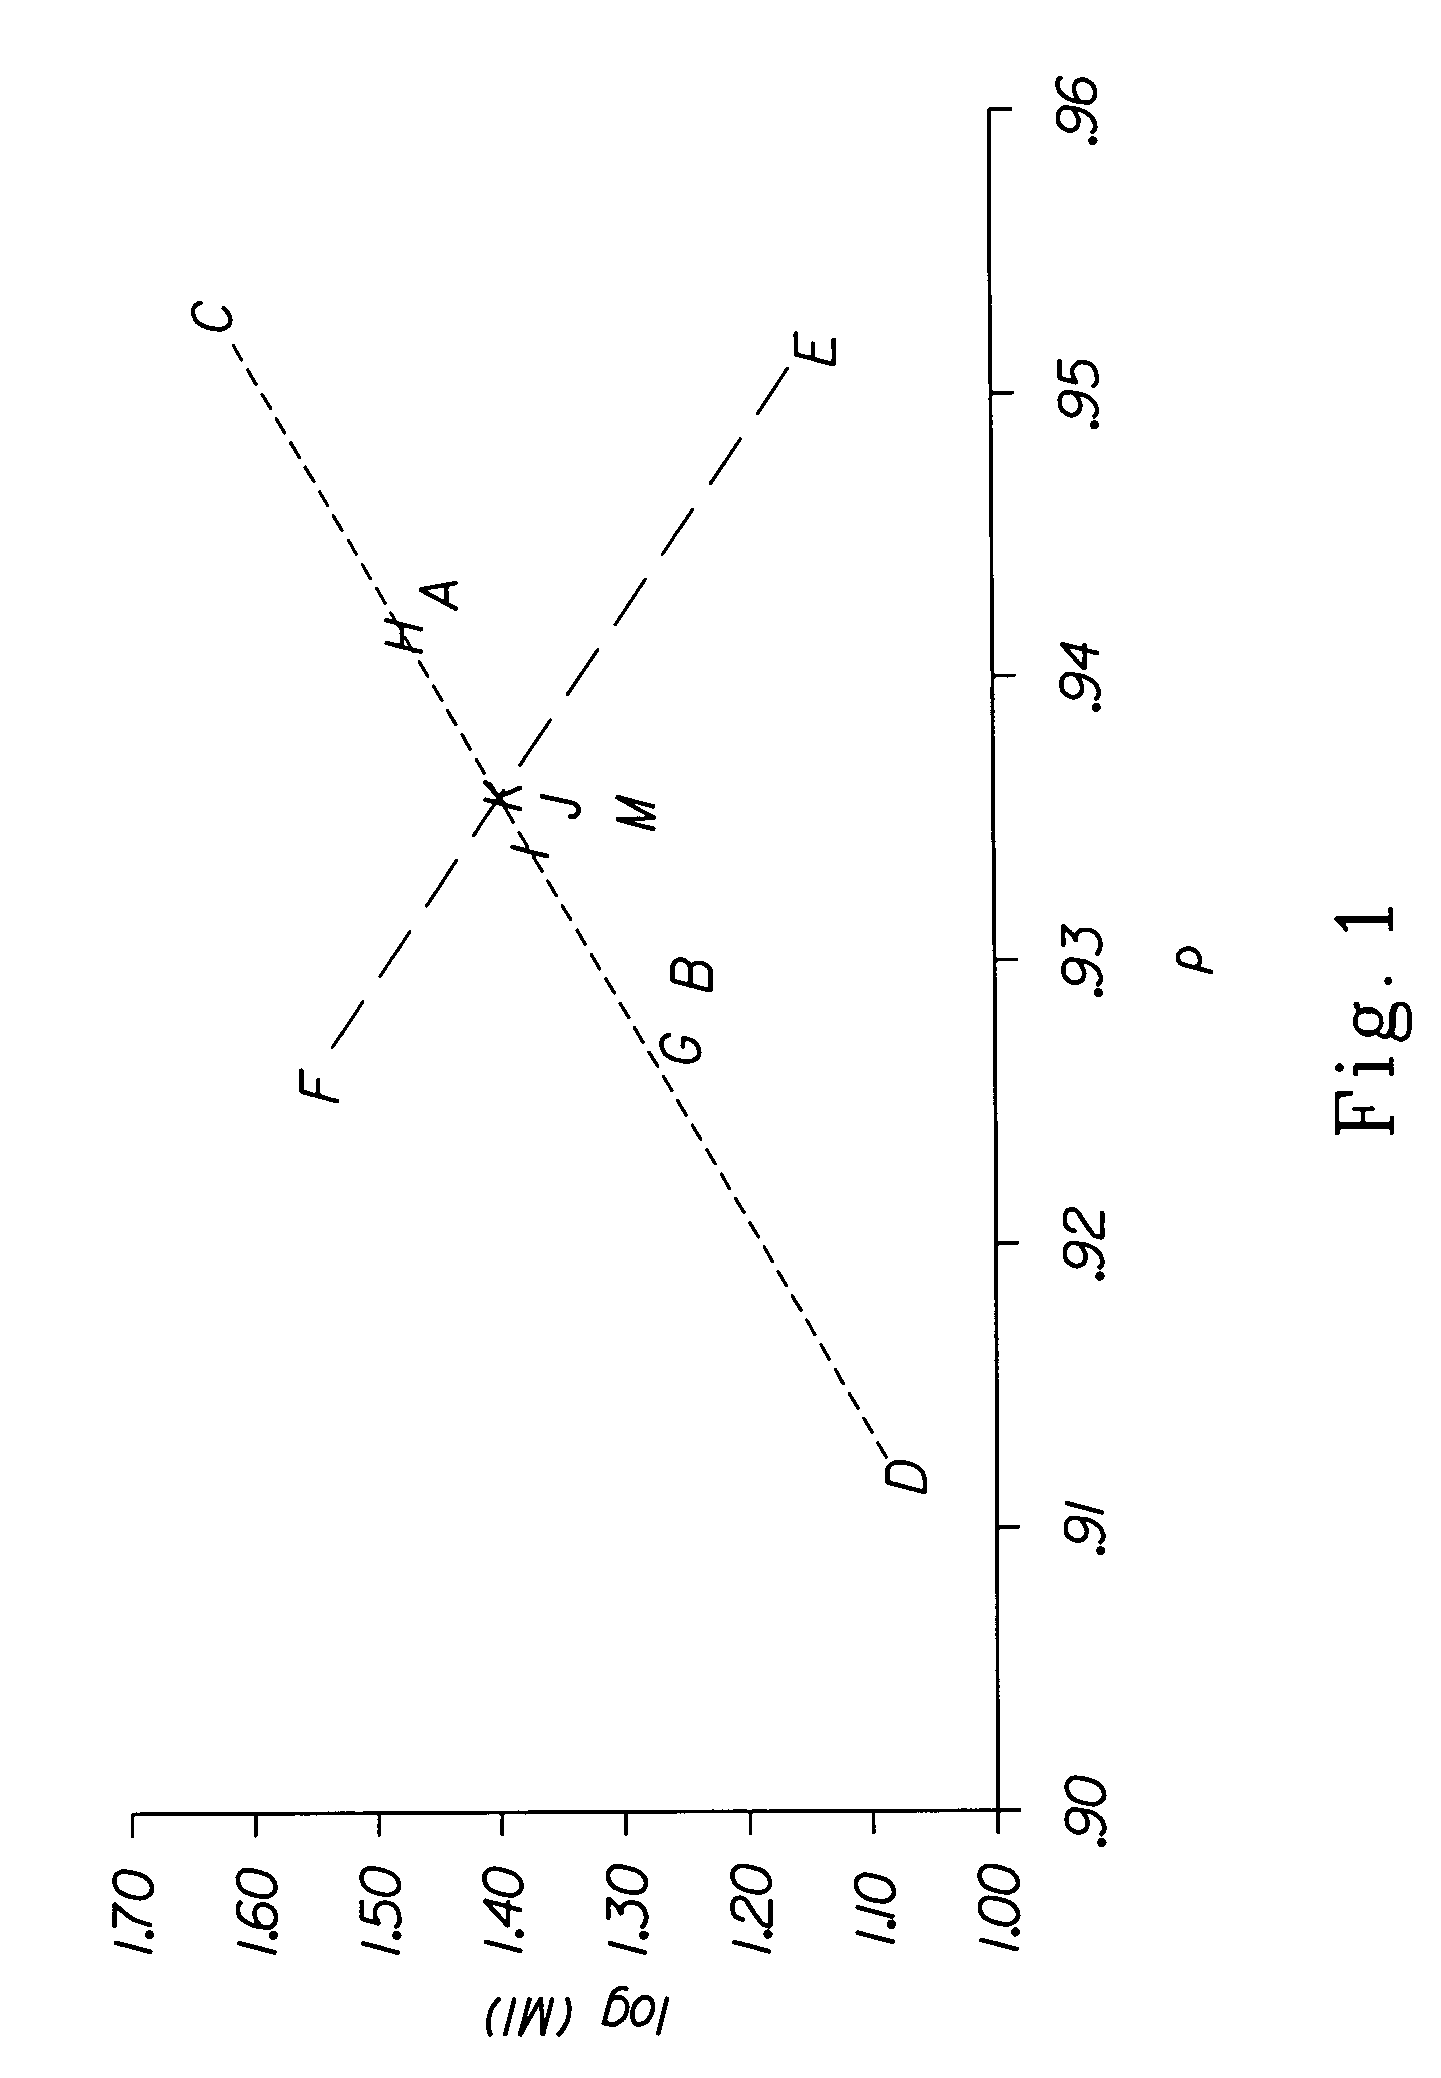 Fibers and nonwovens comprising polyethylene blends and mixtures